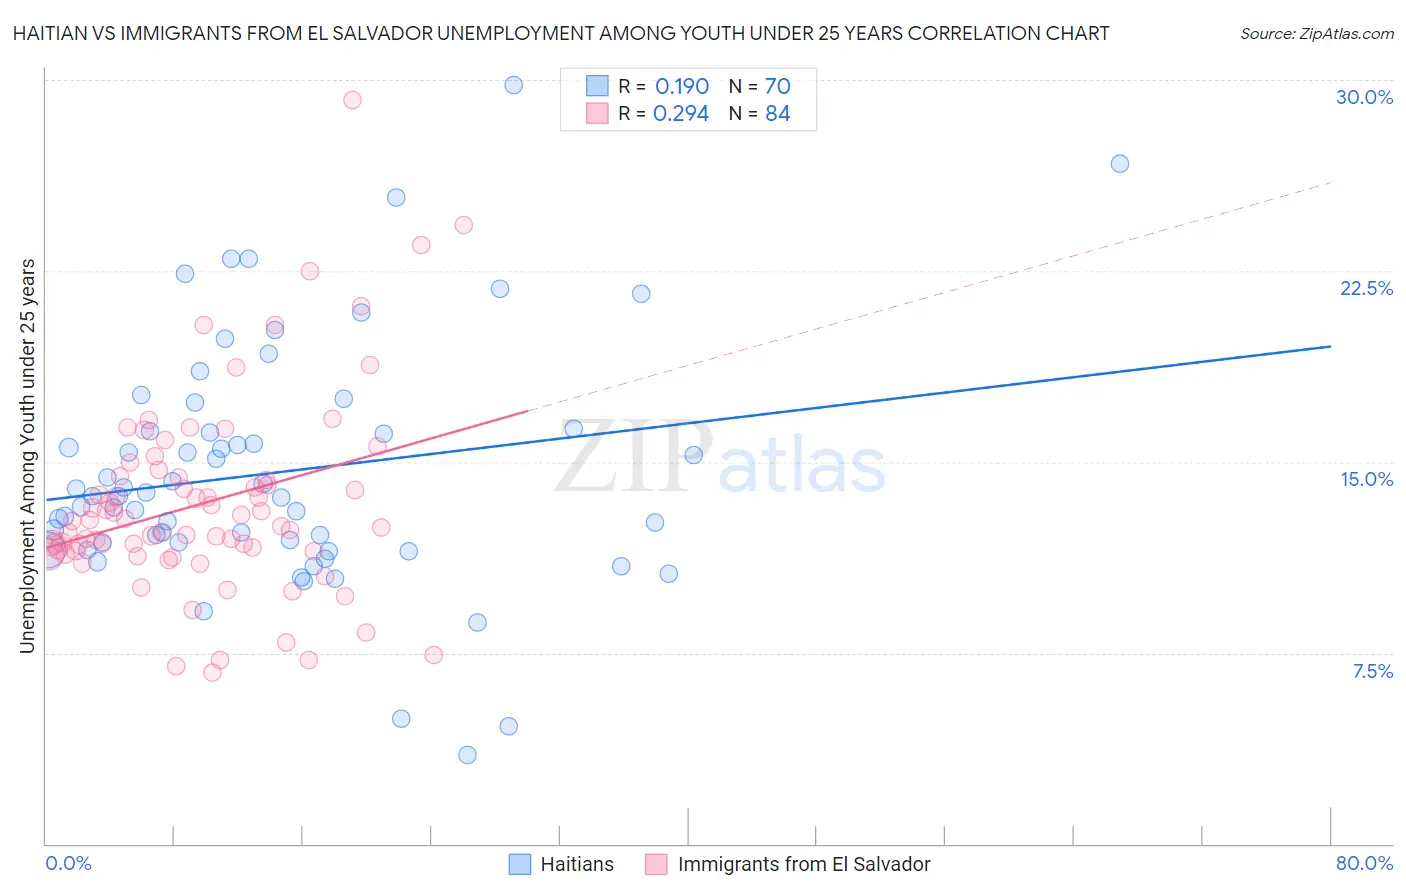 Haitian vs Immigrants from El Salvador Unemployment Among Youth under 25 years